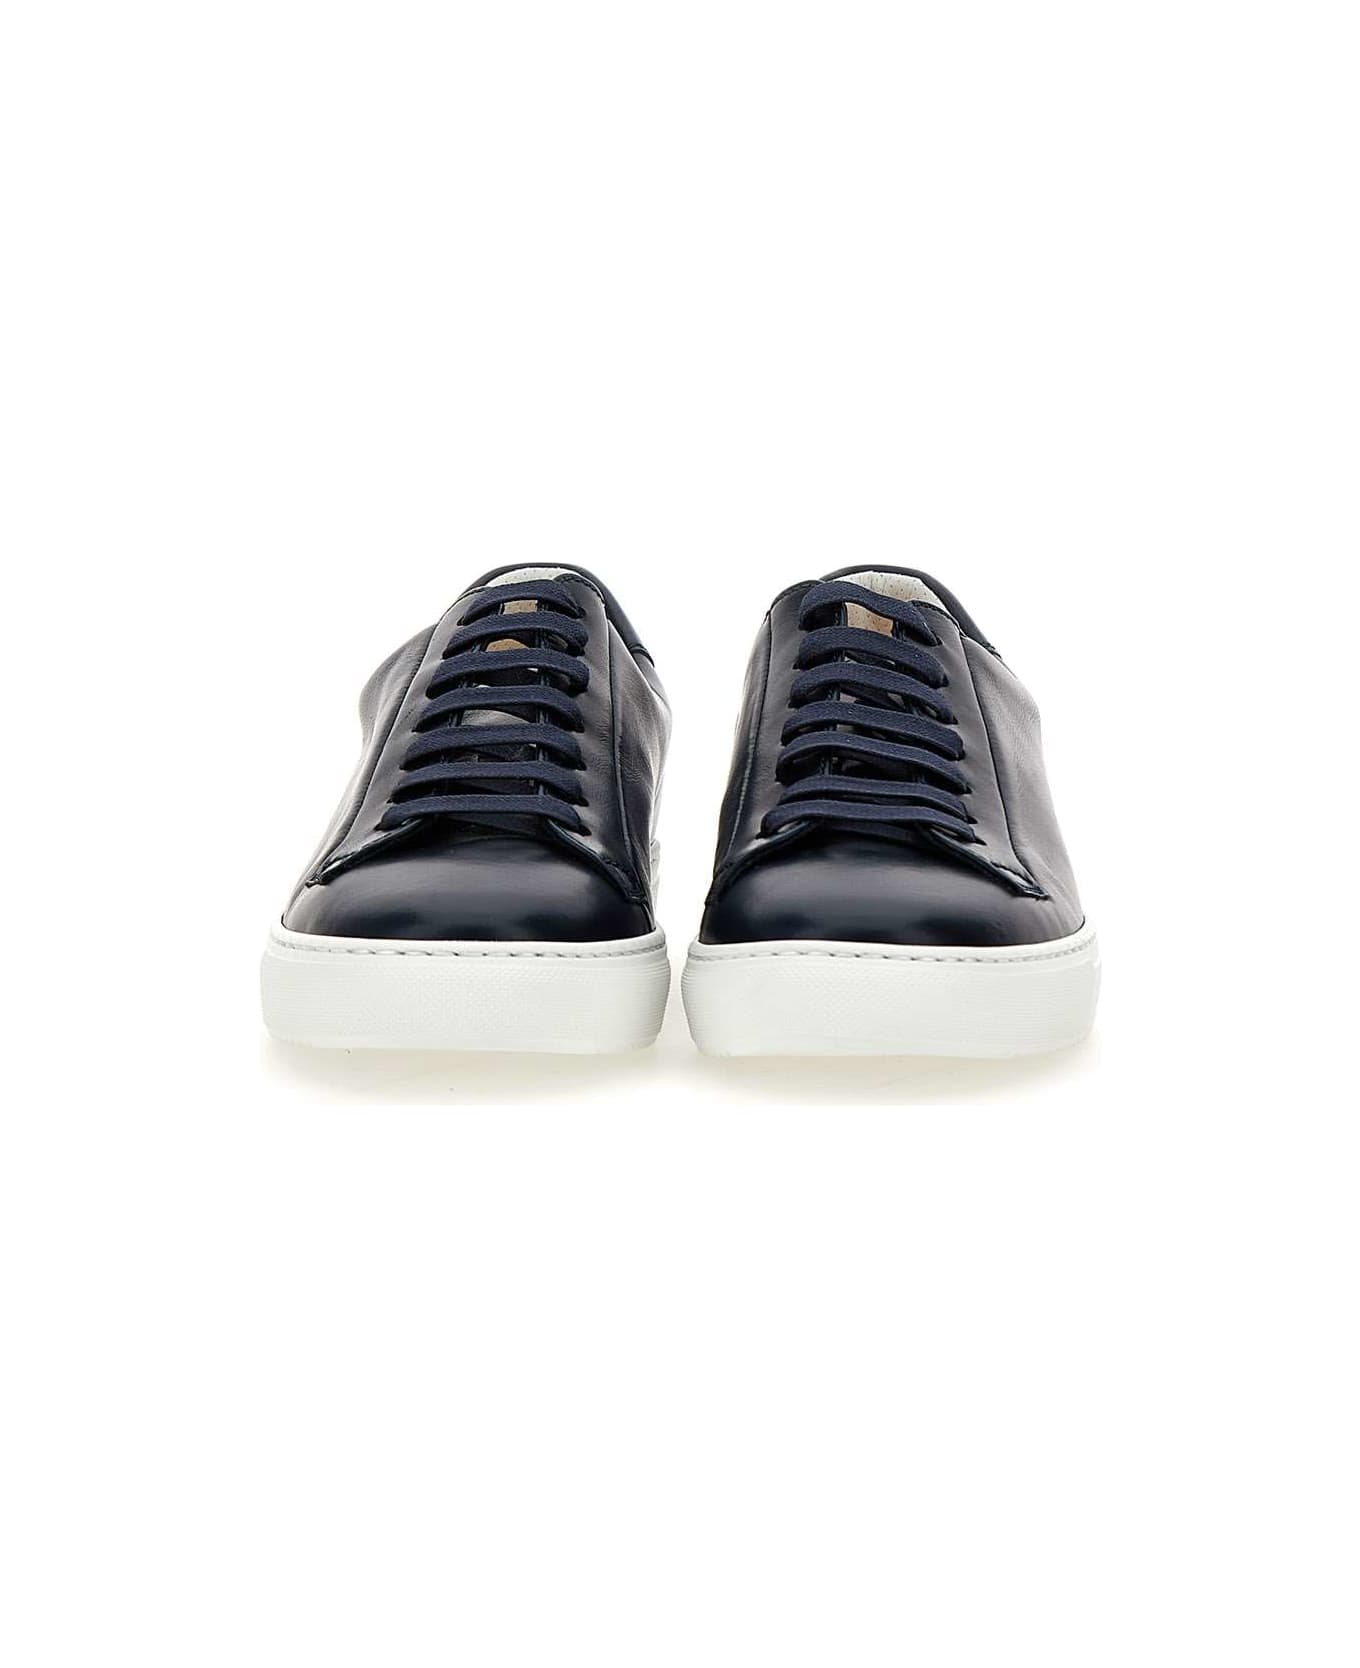 Doucal's "chiffon" Leather Sneakers - BLUE